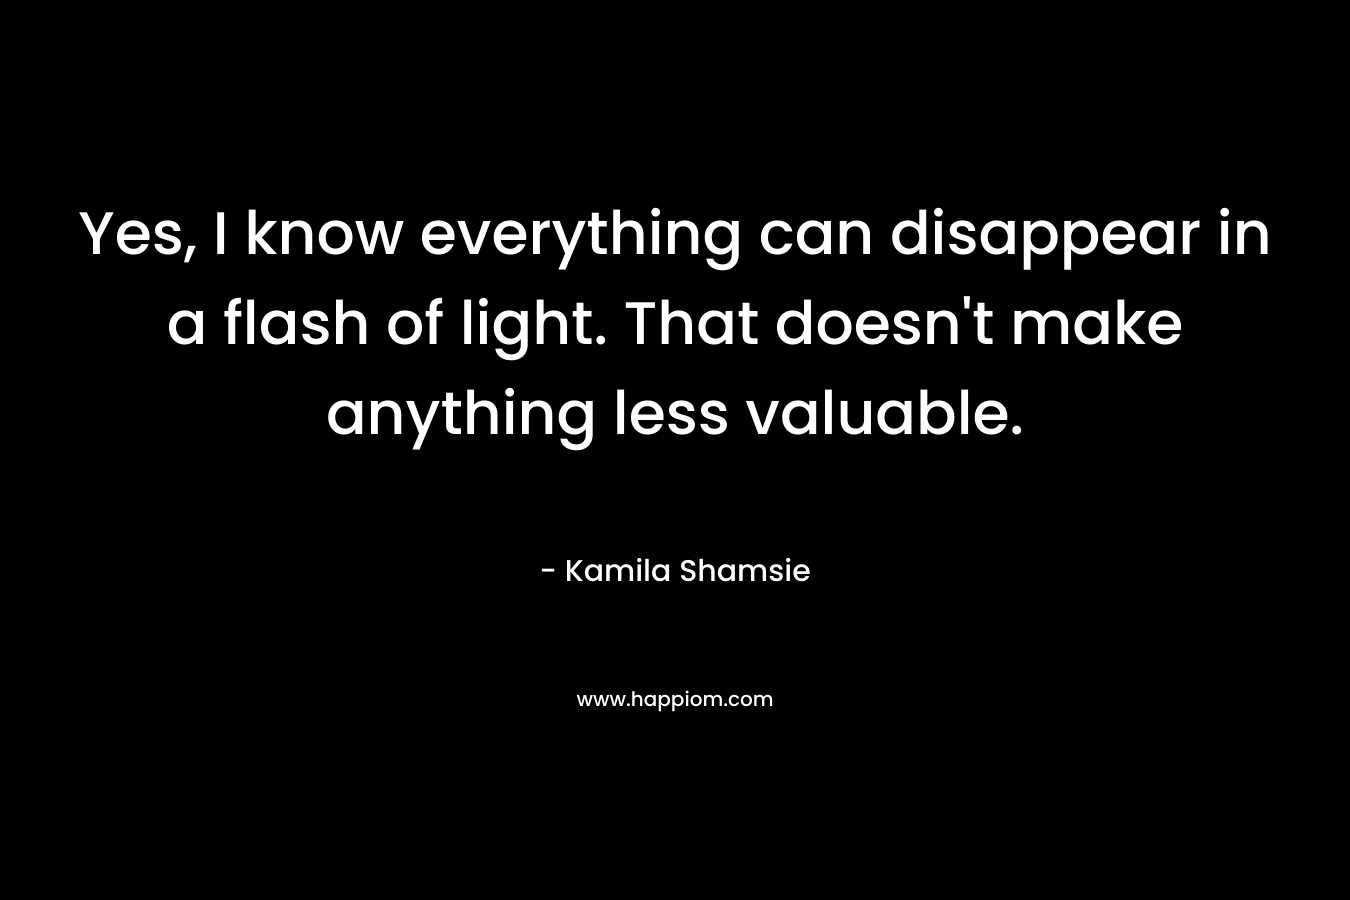 Yes, I know everything can disappear in a flash of light. That doesn’t make anything less valuable. – Kamila Shamsie